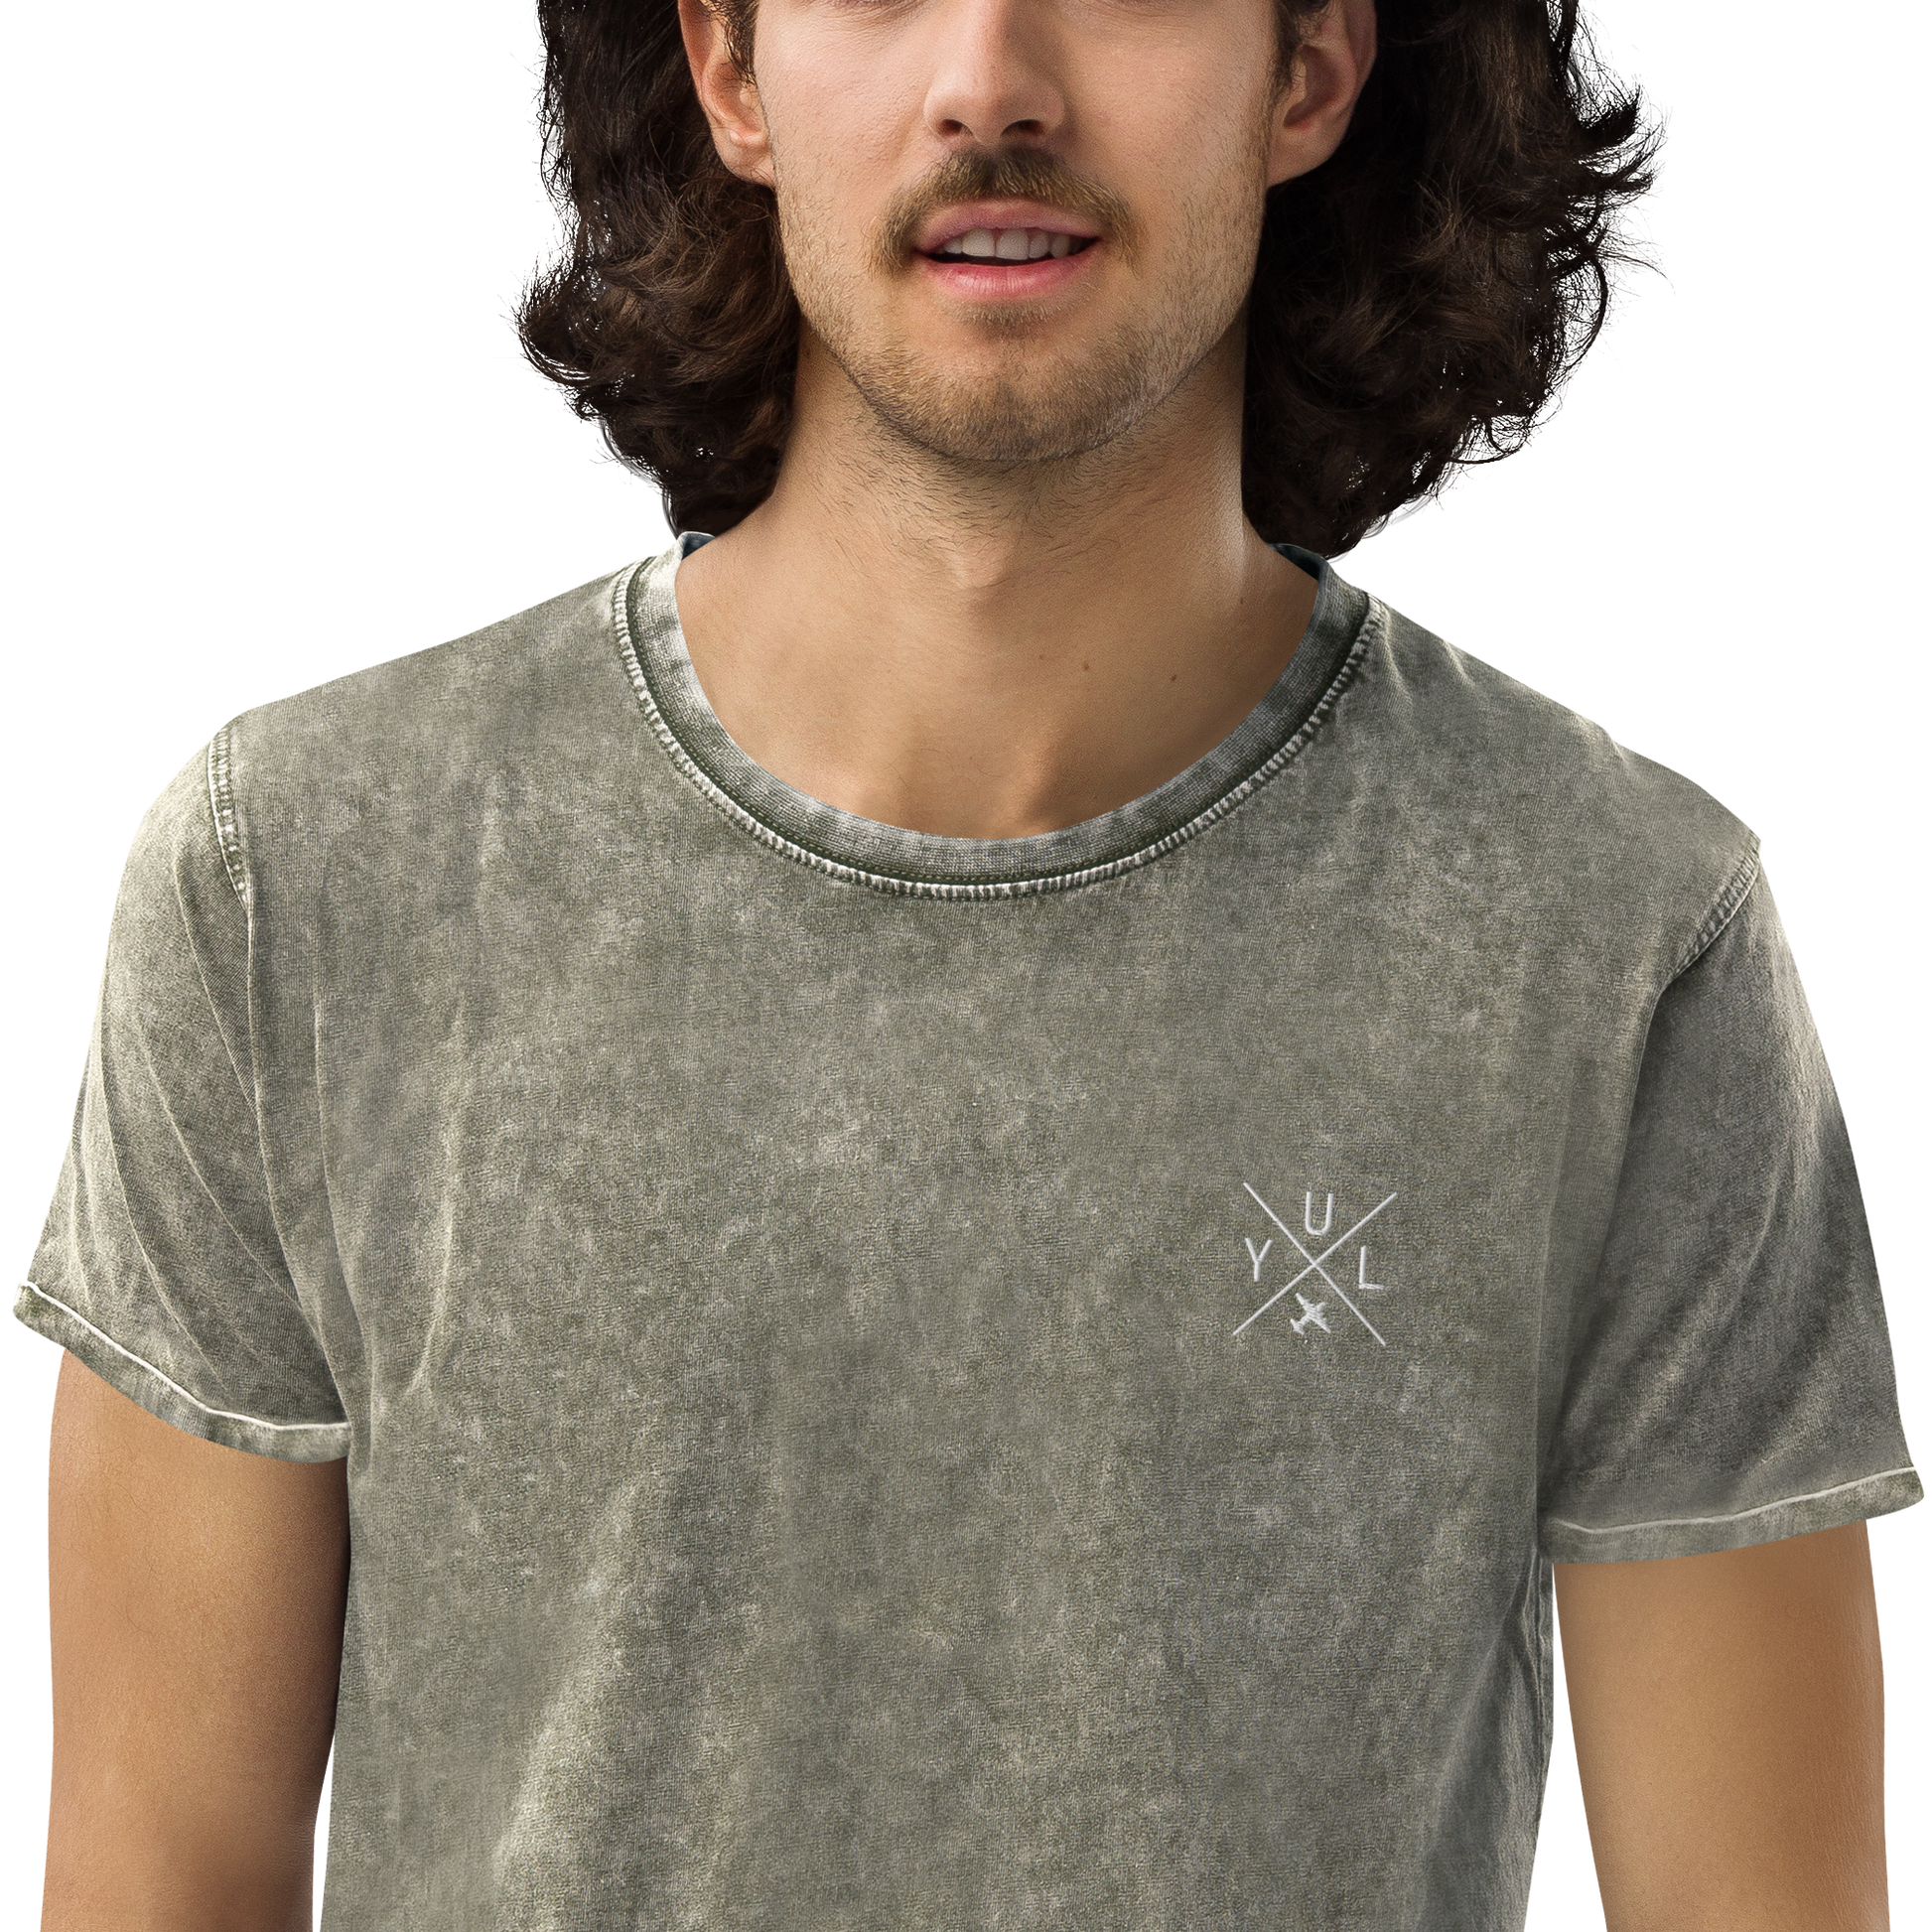 YHM Designs - YUL Montreal Denim T-Shirt - Crossed-X Design with Airport Code and Vintage Propliner - White Embroidery - Image 11